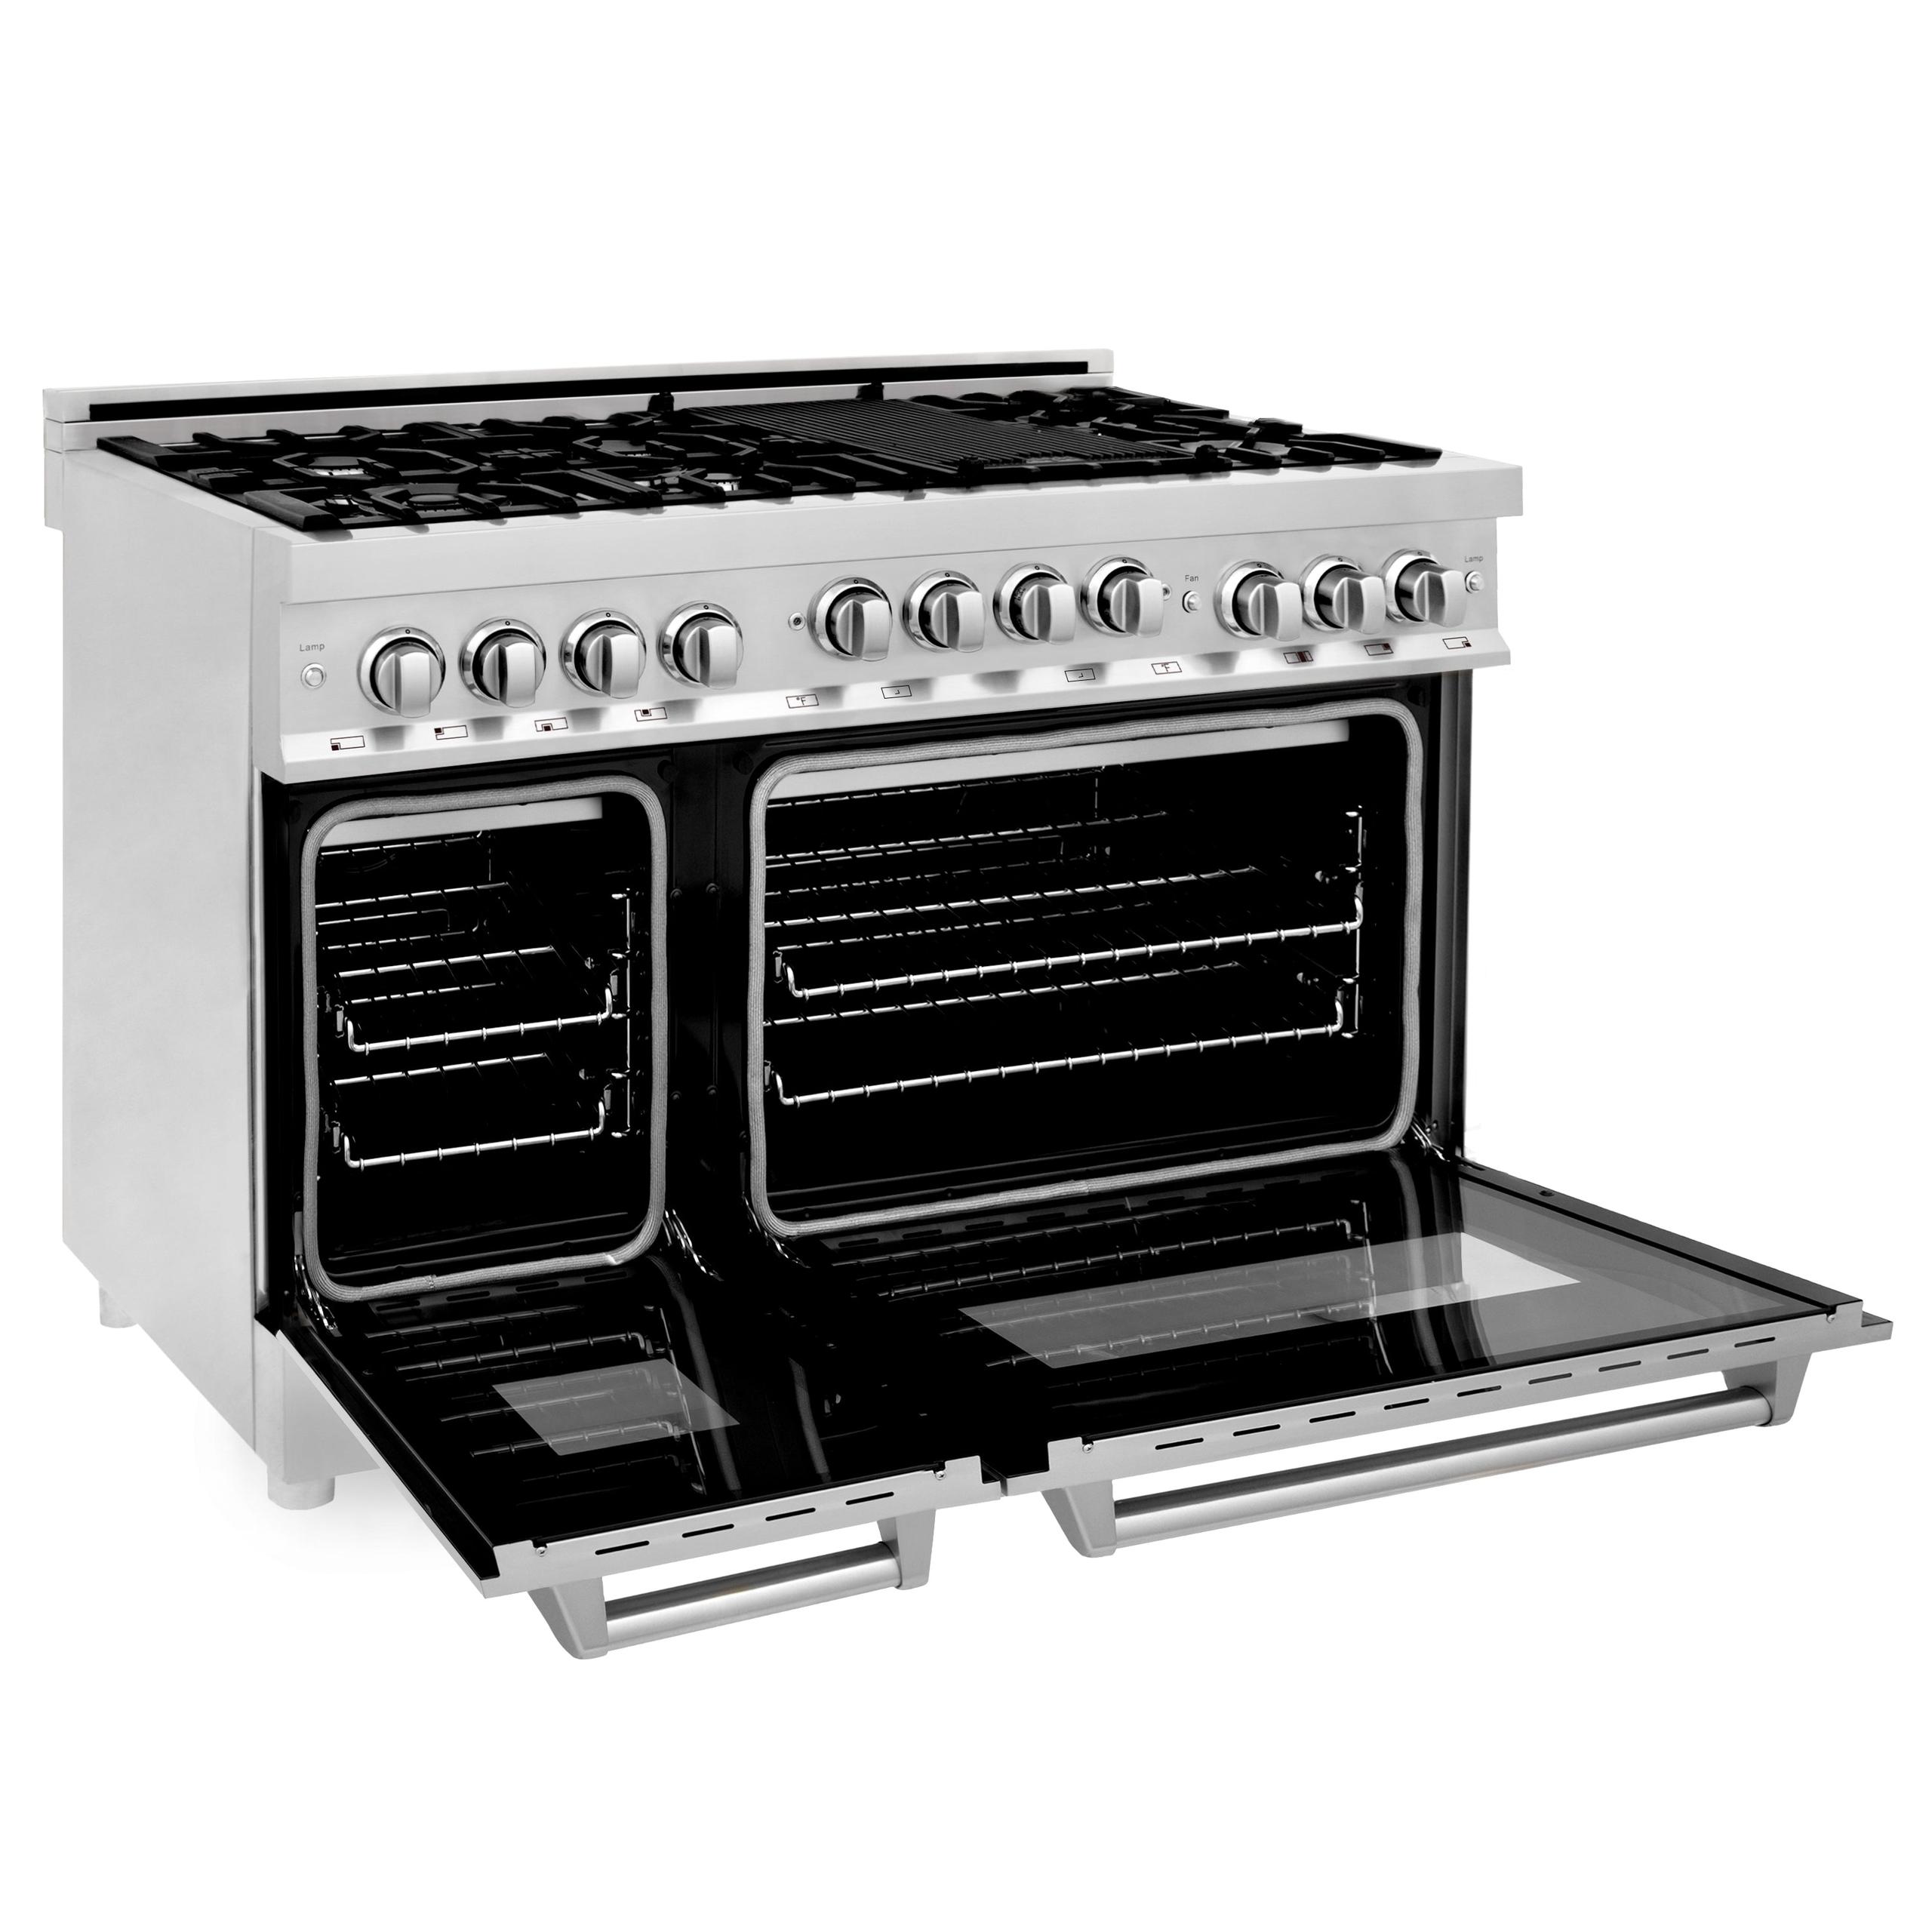 ZLINE KITCHEN AND BATH RGBG48 ZLINE 48" 6.0 cu. ft. Range with Gas Stove and Gas Oven in Stainless Steel Color: Blue Gloss